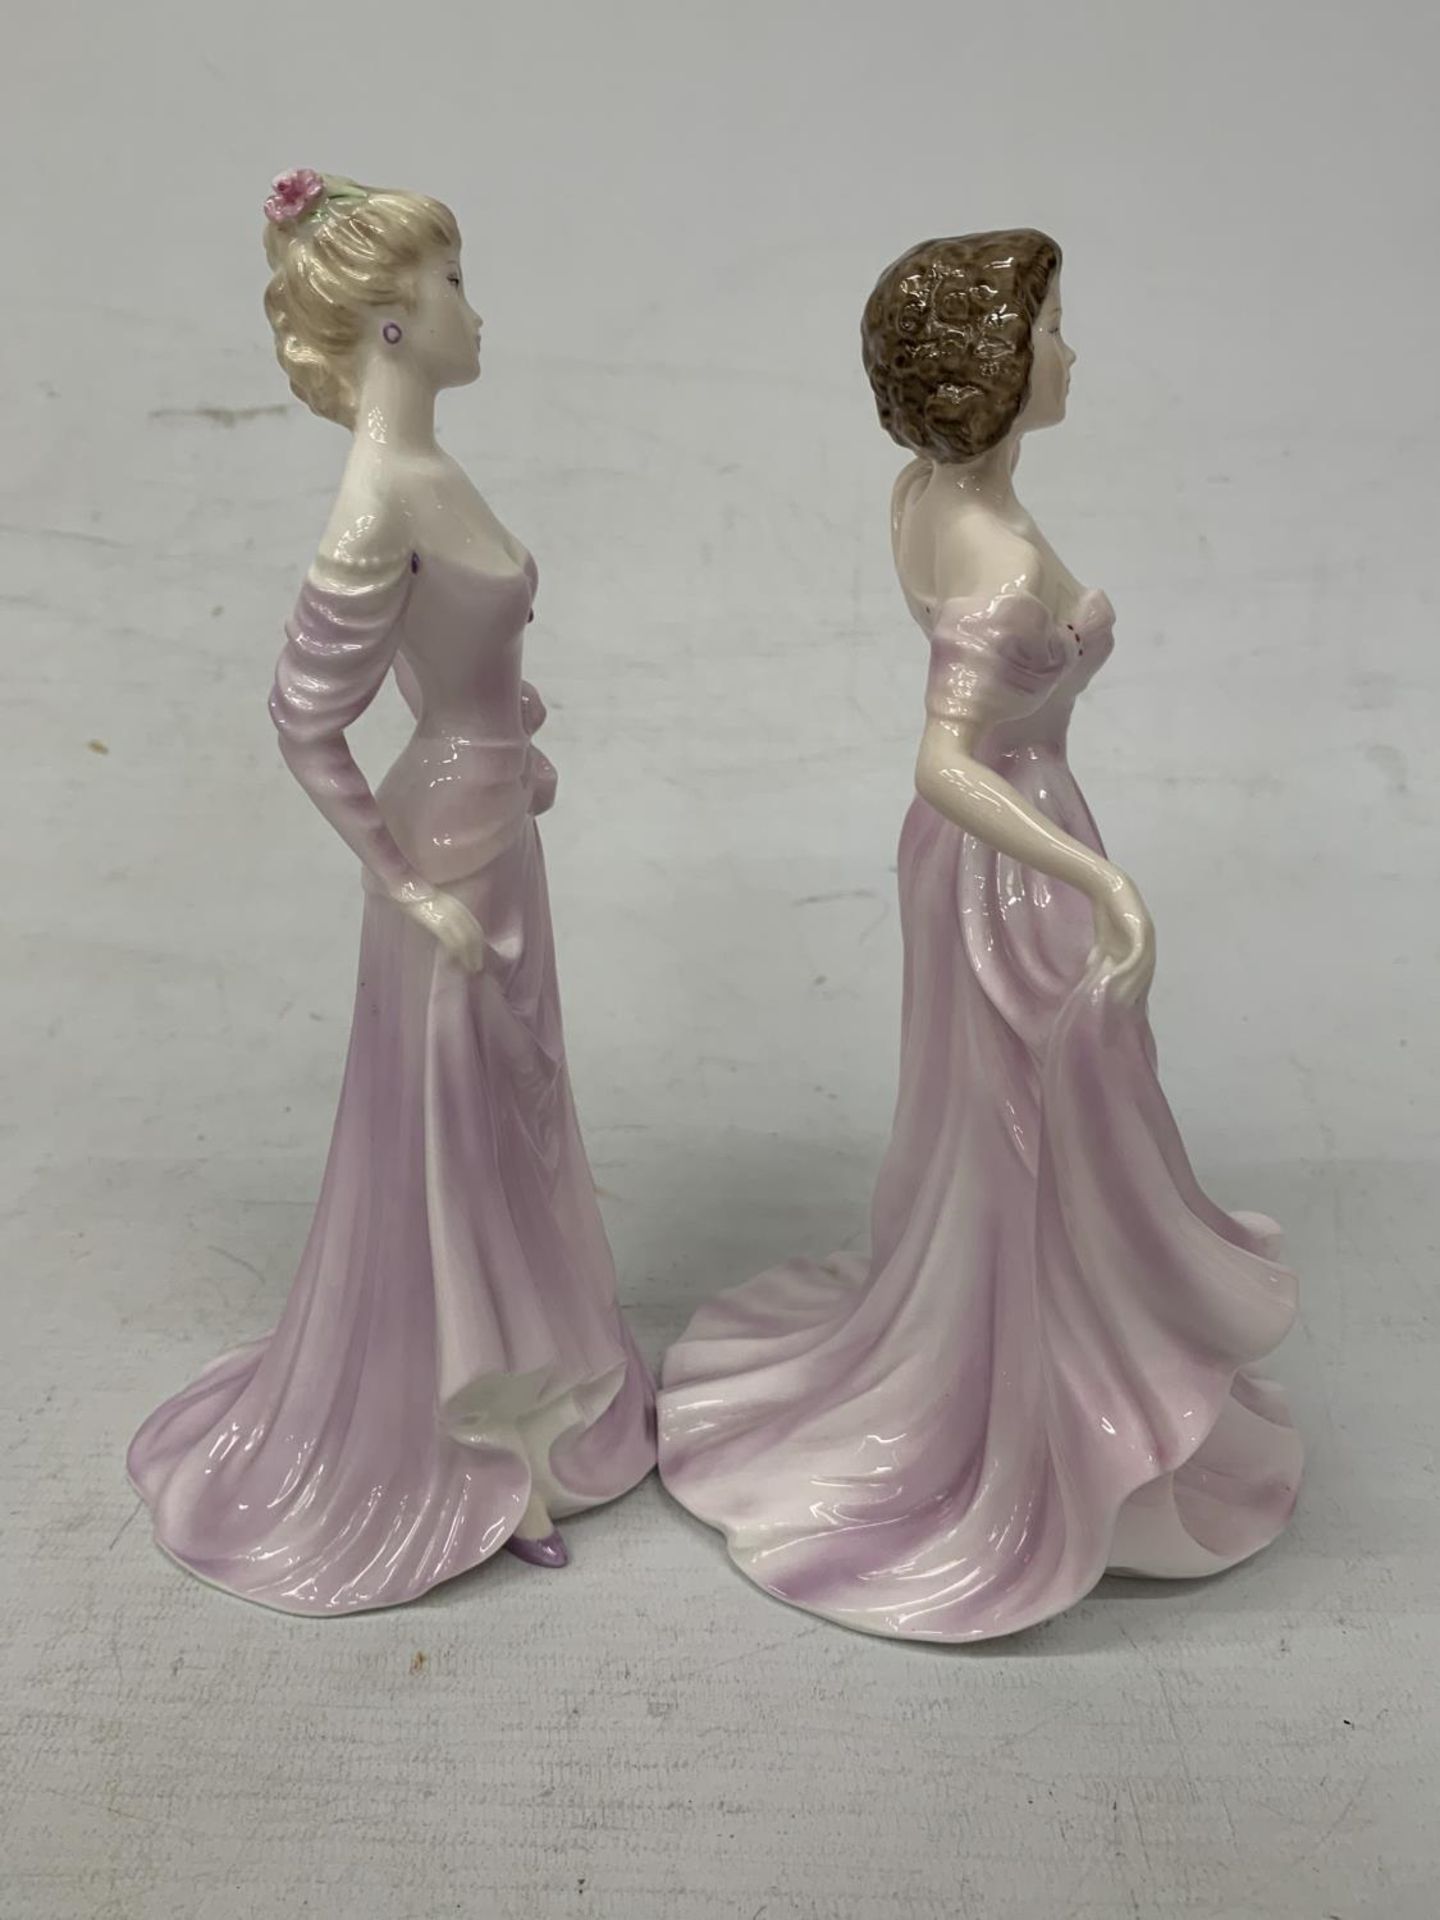 TWO COALPORT FIGURINES "STEPHANIE" (1992) AND VERONICA FROM THE LADIES OF FASHION COLLECTION ( - Image 2 of 4